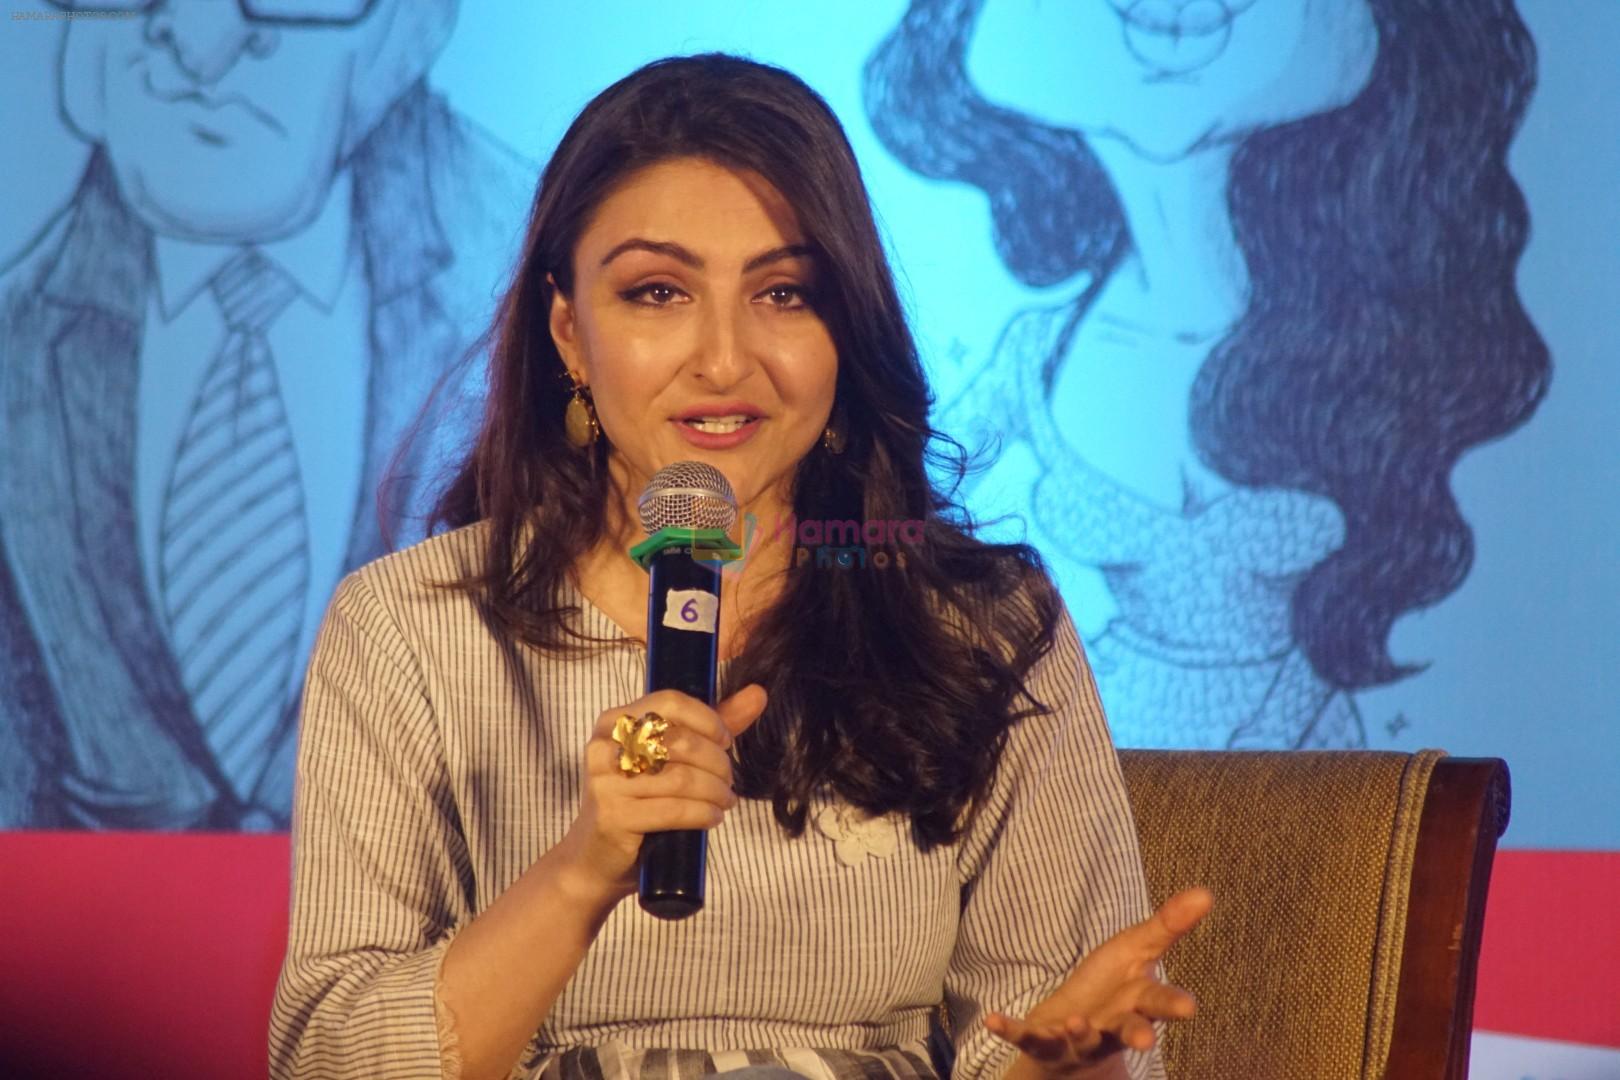 Soha Ali Khan's Debut Book Launch The Perils Of Being Moderately Famous on 12th Dec 2017